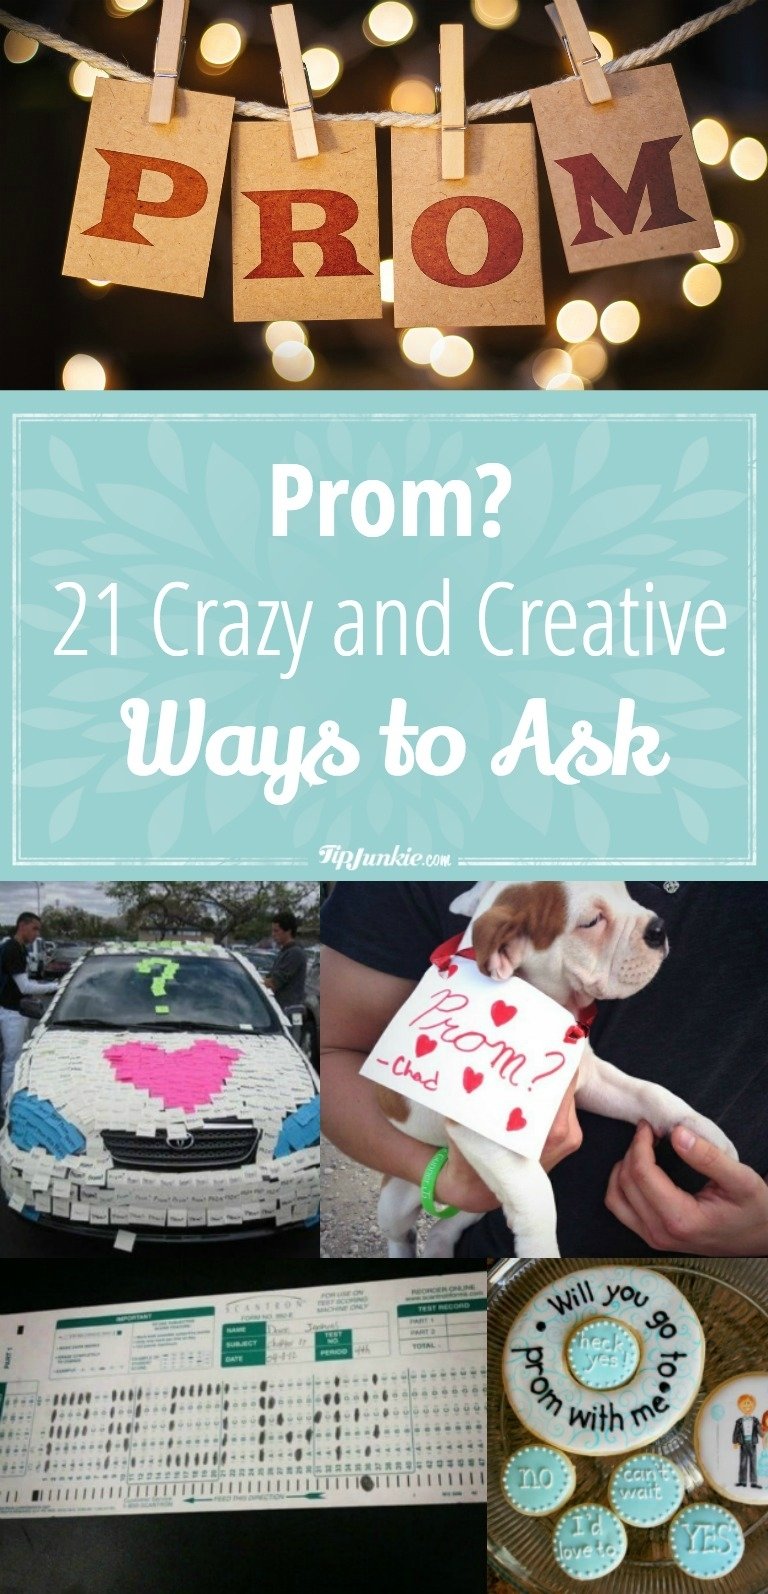 10 Trendy Asking A Girl To Prom Ideas prom 21 crazy and creative ways to ask tip junkie 3 2022